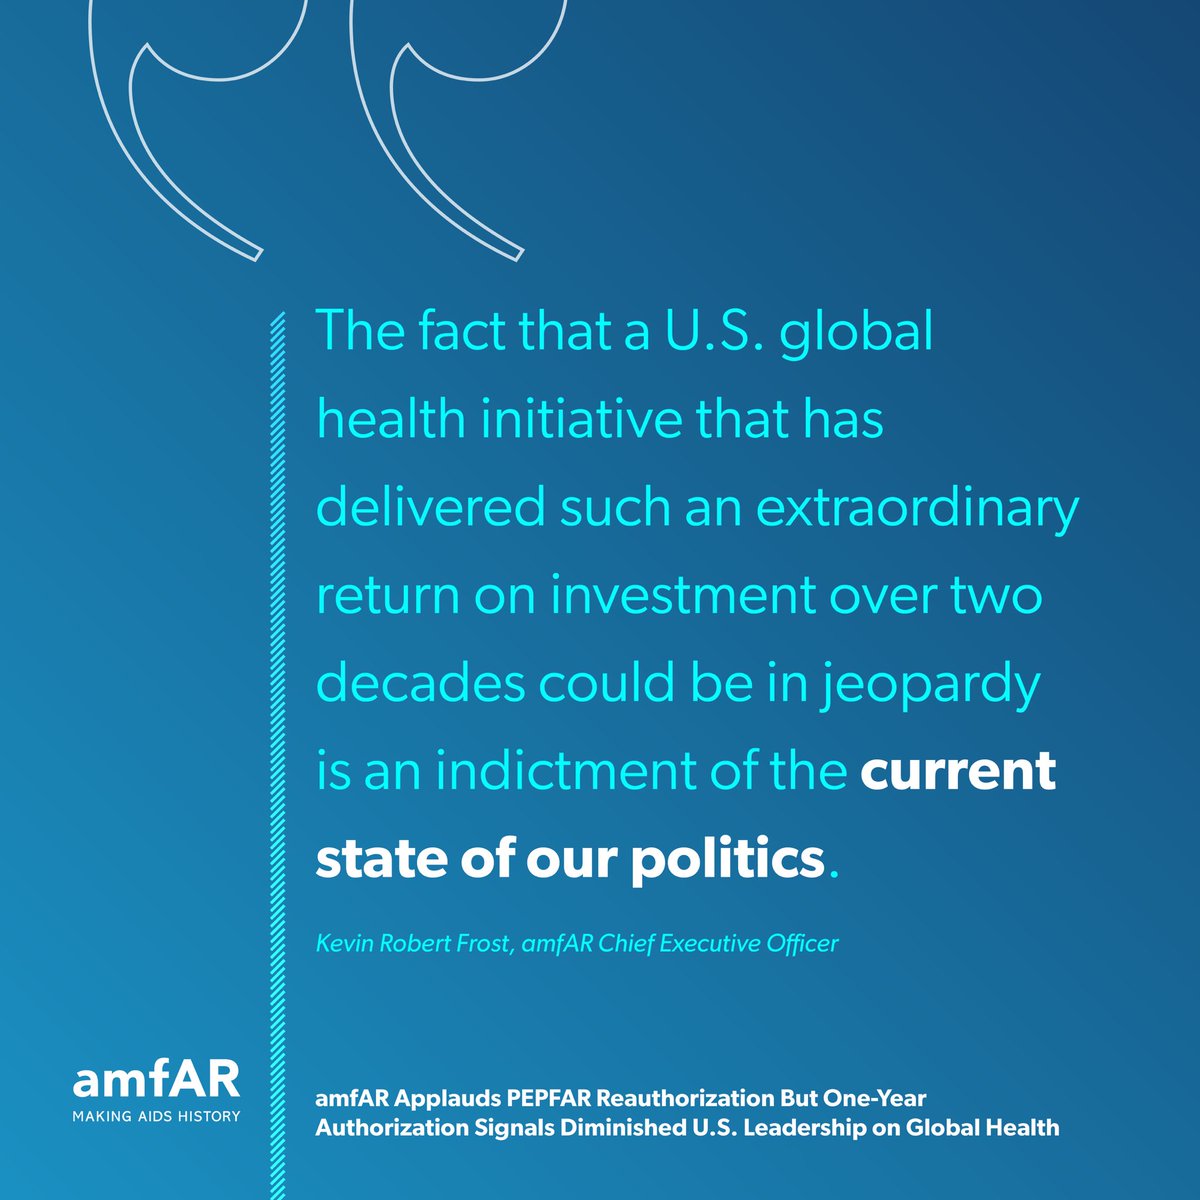 amfAR applauds Congress’s one-year reauthorization of PEPFAR but the diminished timeline sets up yet another fight in Congress next year and undermines the authority of the U.S. as a leader in global public health. amfar.org/press-releases…